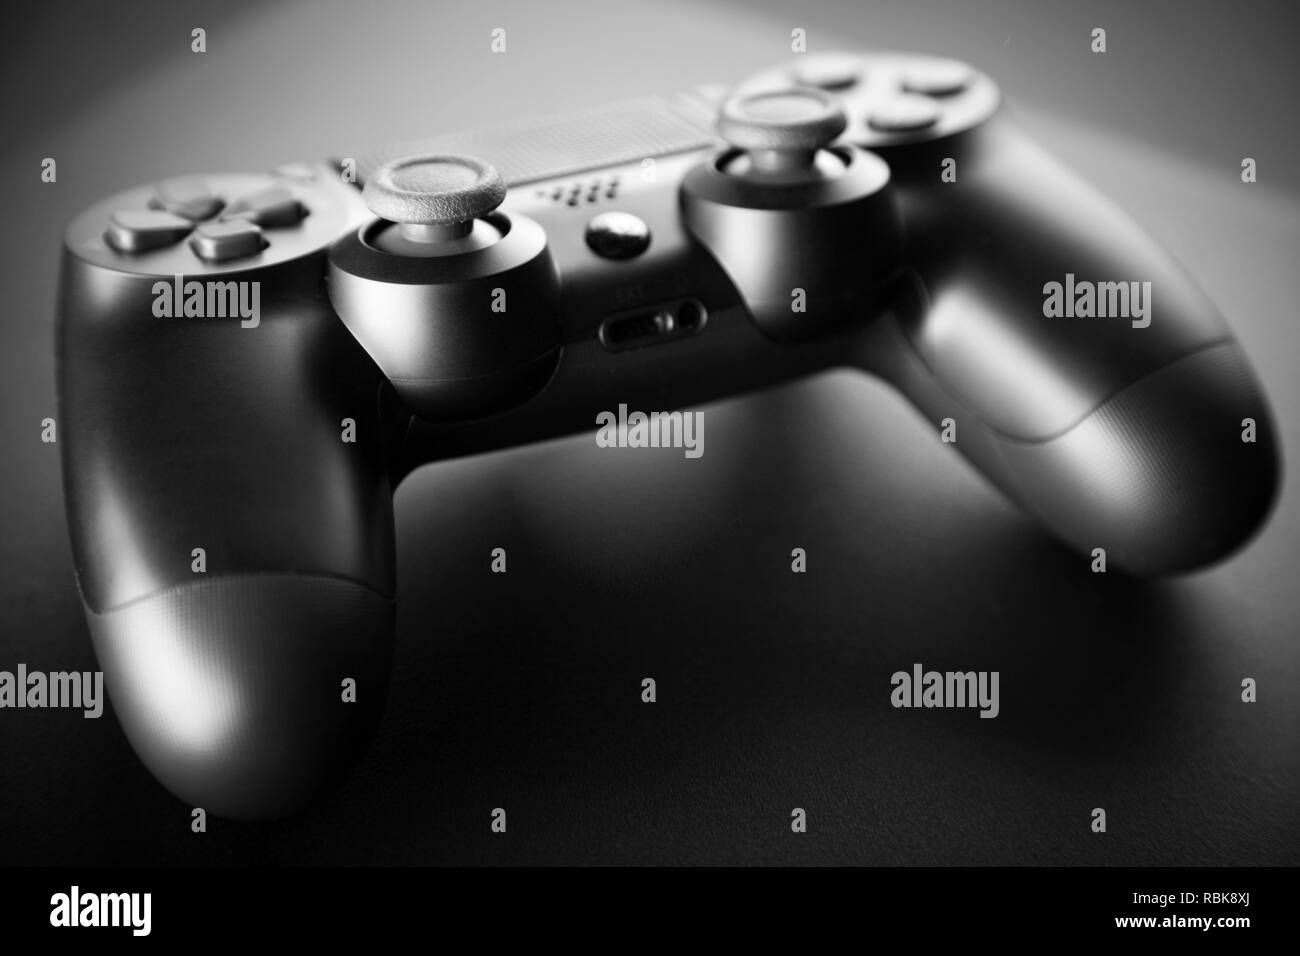 Gaming console and controller Stock Photo